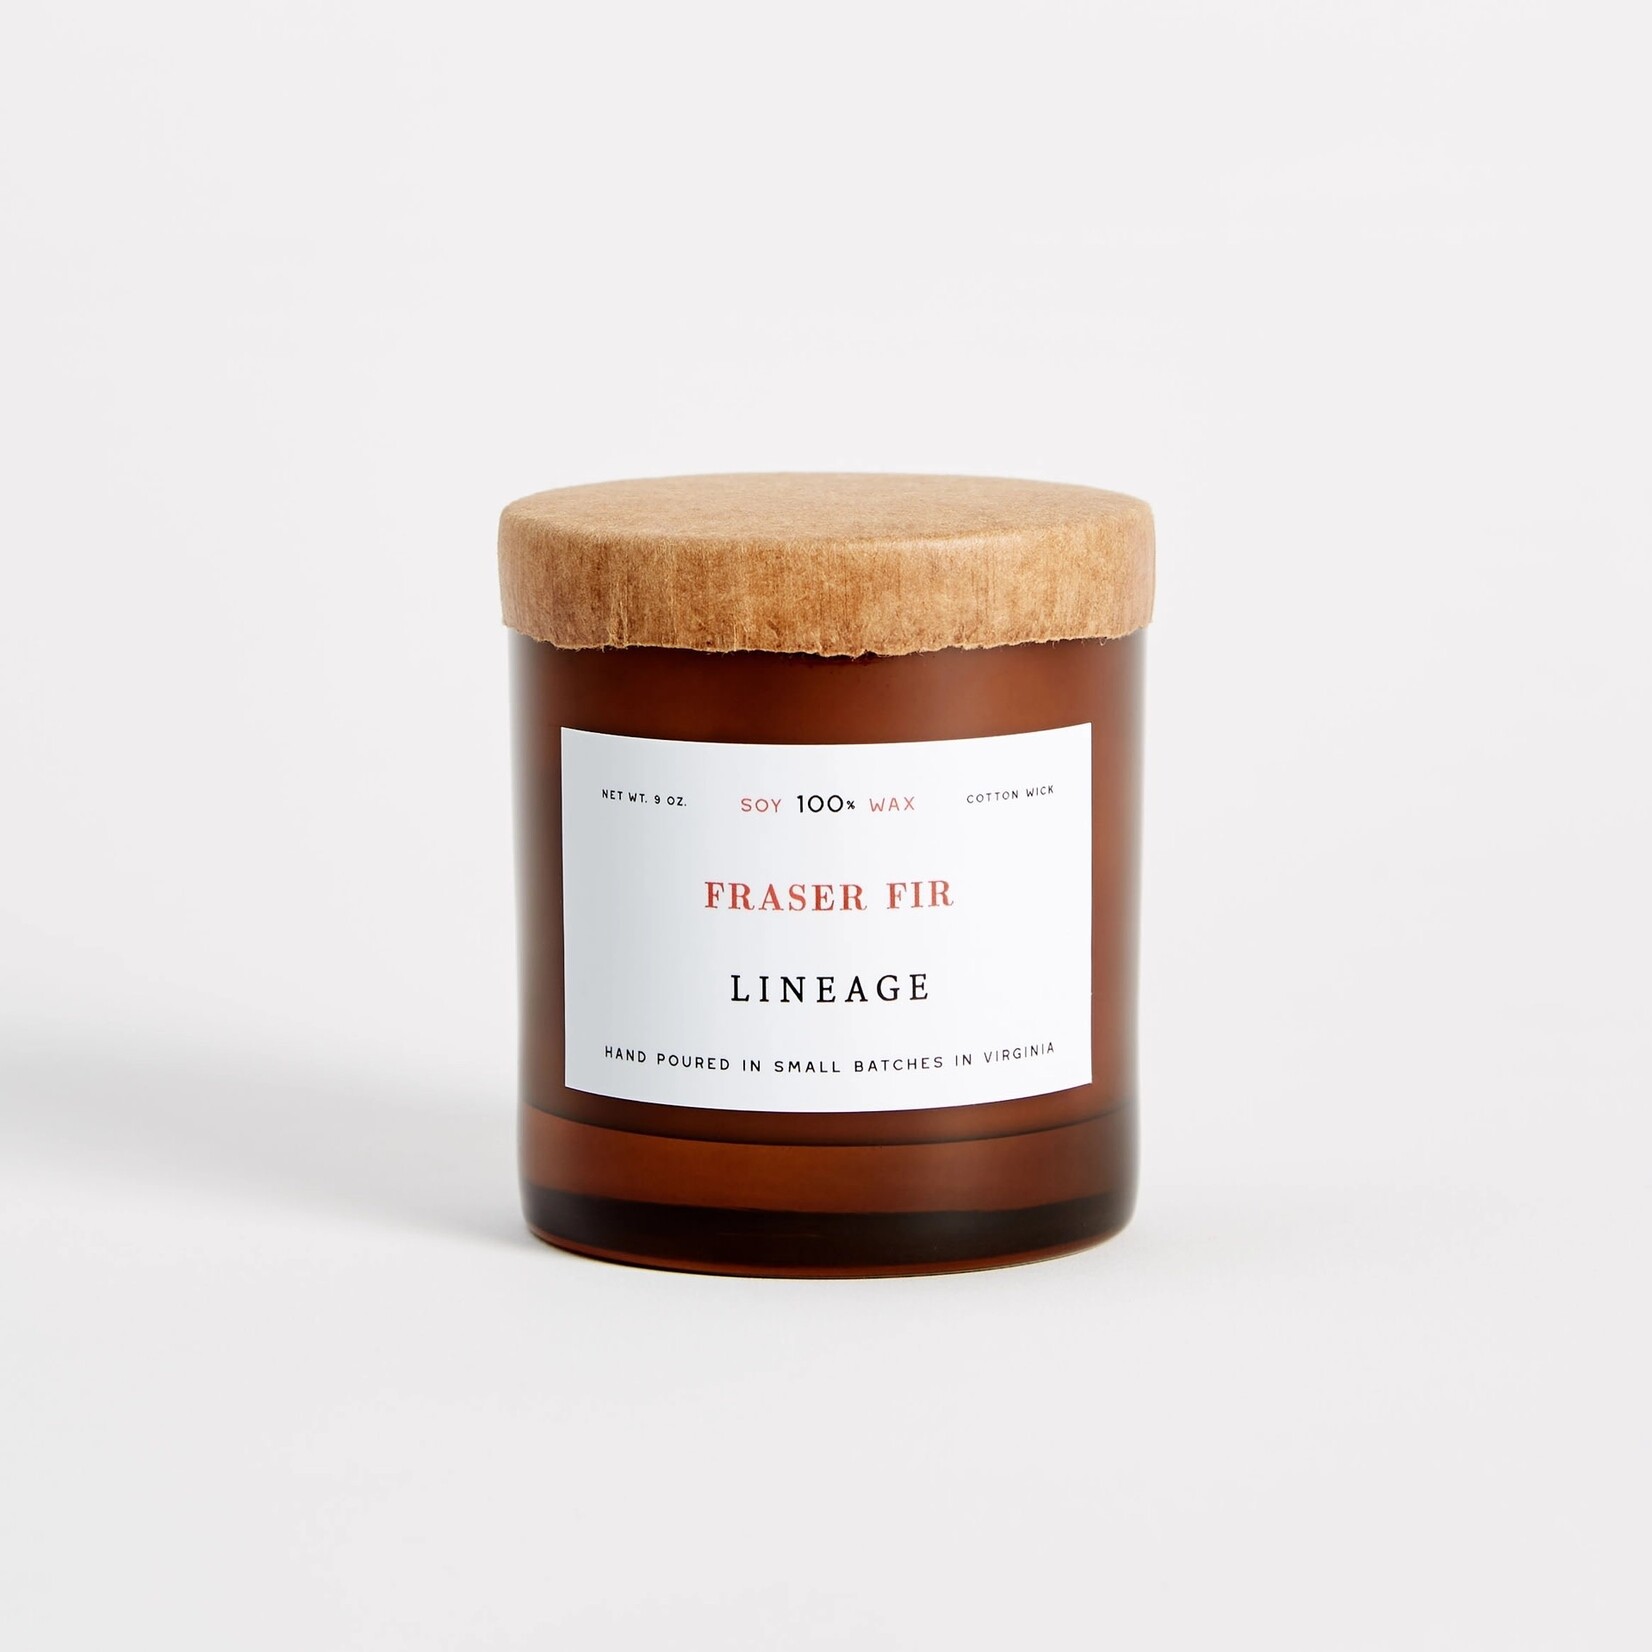 Lineage Lineage Candle